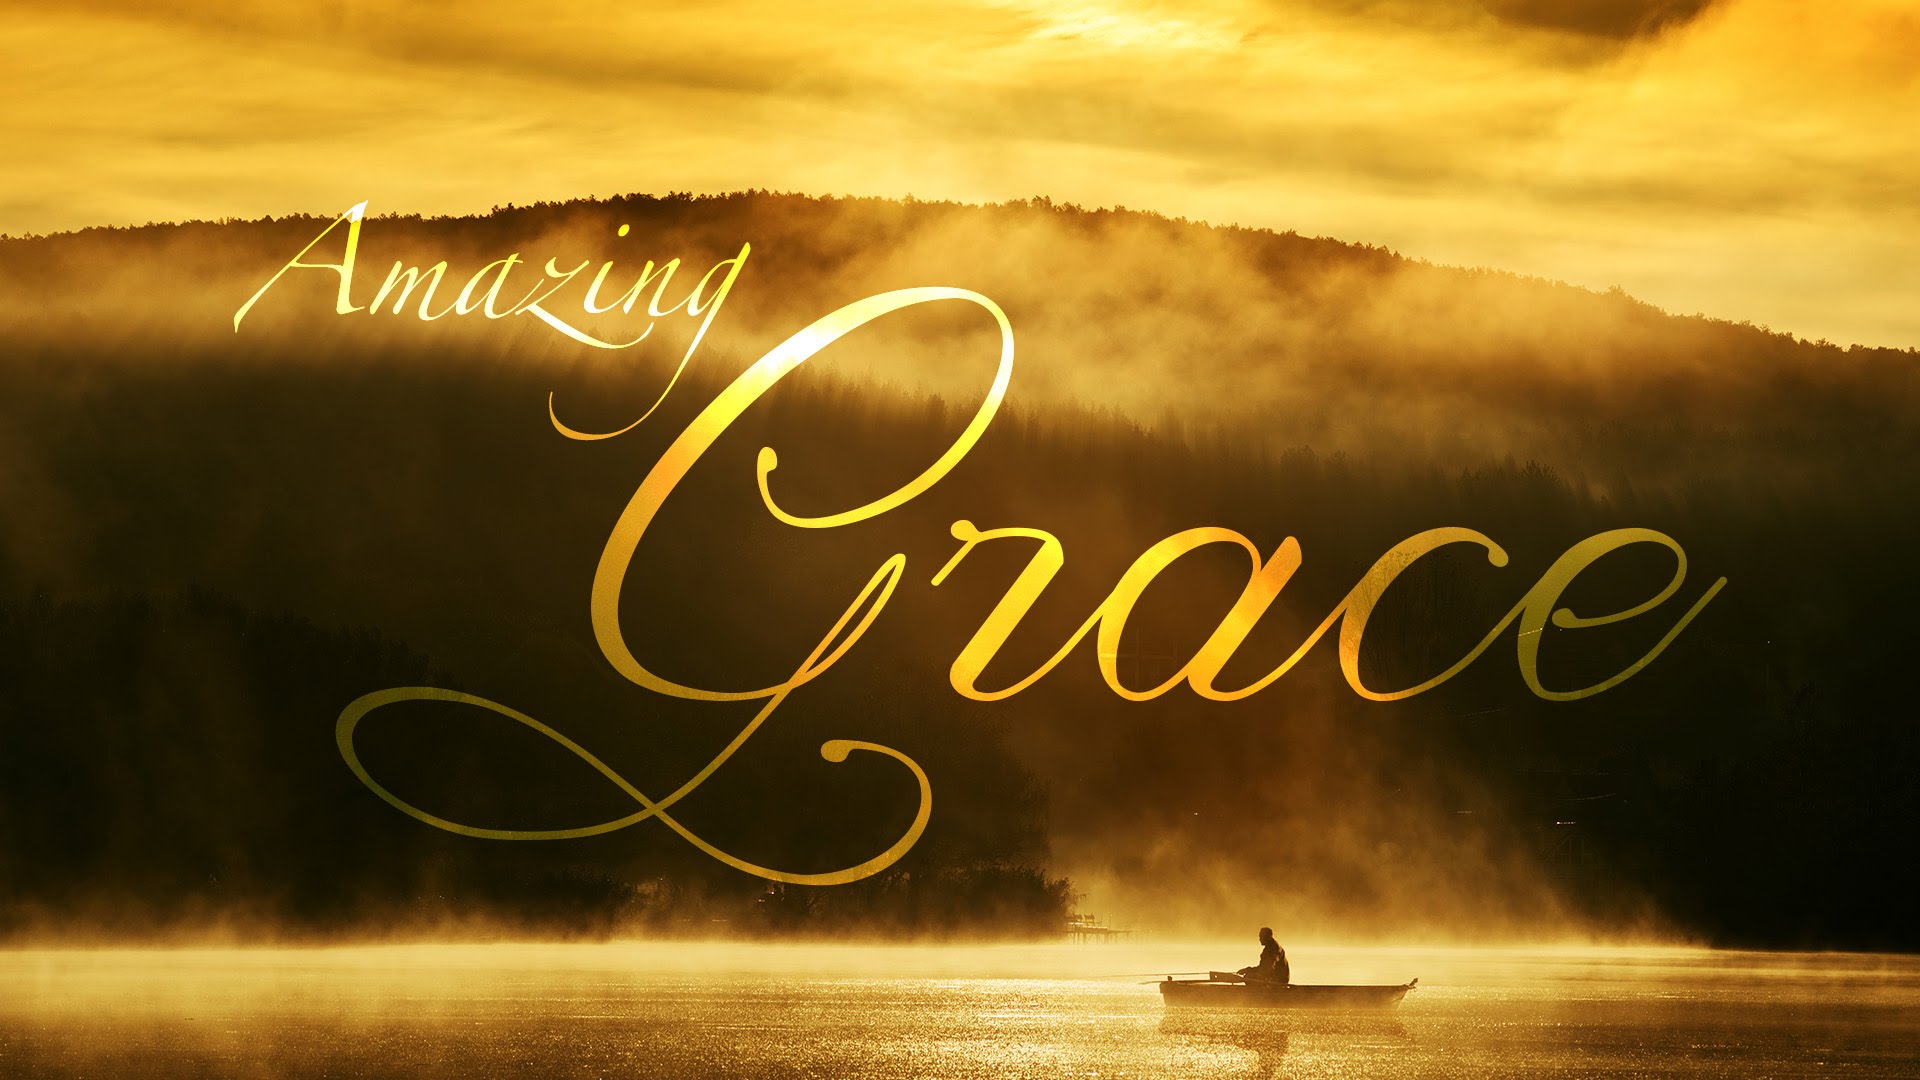 Amazing Grace - words to the classic hymn composed by John Newton, famous former slave trader who became converted and eventually a Christian minister—by God’s Amazing Grace